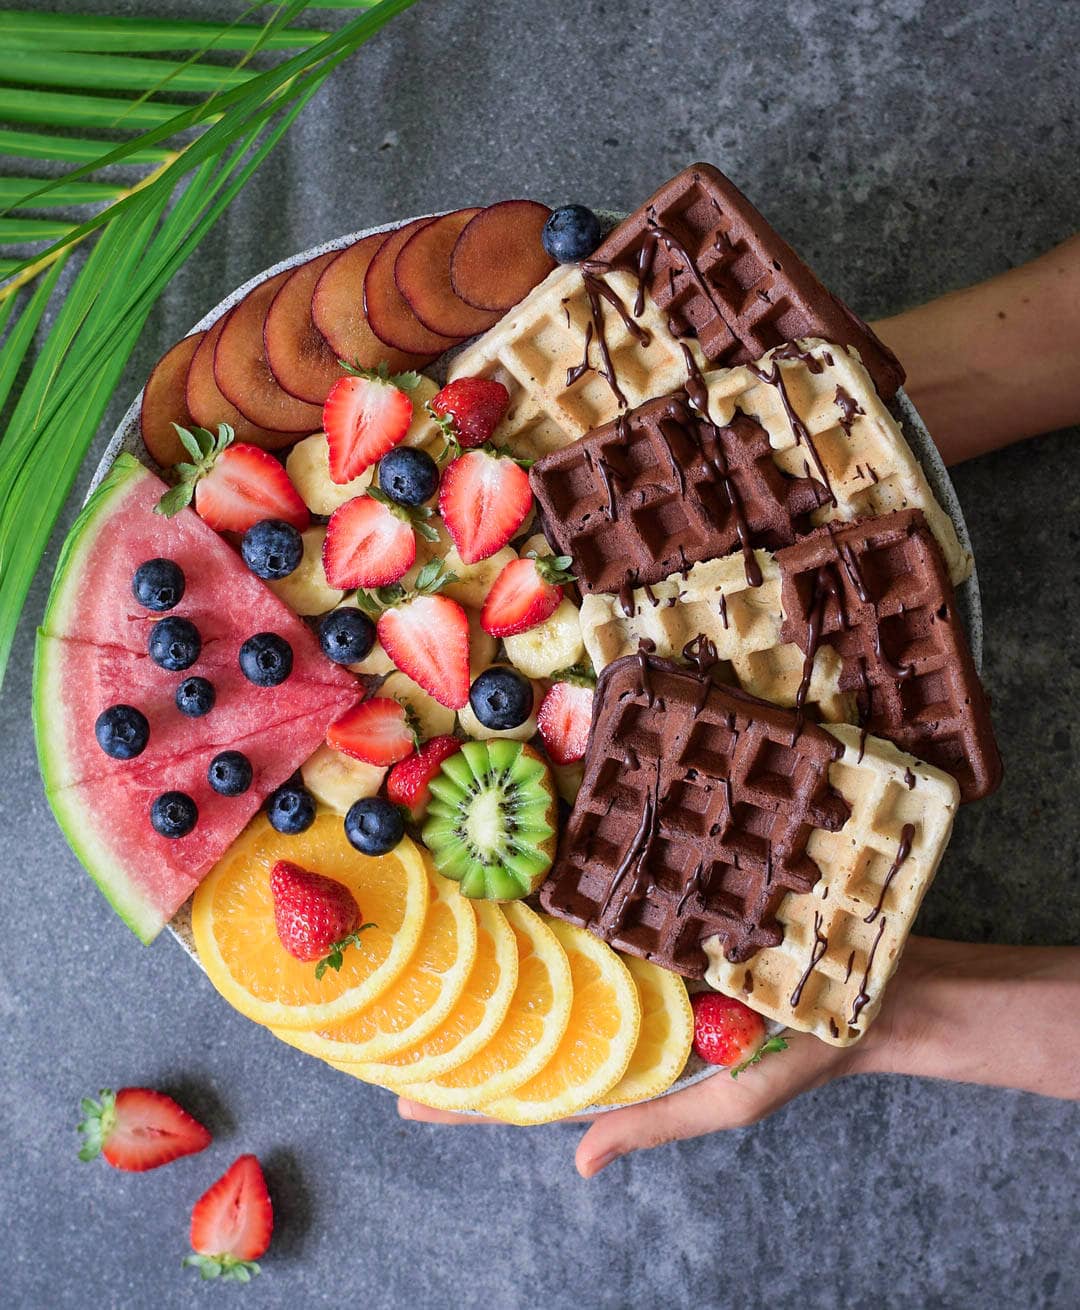 Homemade eggless vanilla waffles with fruits, a chocolate sauce, arranged on a board